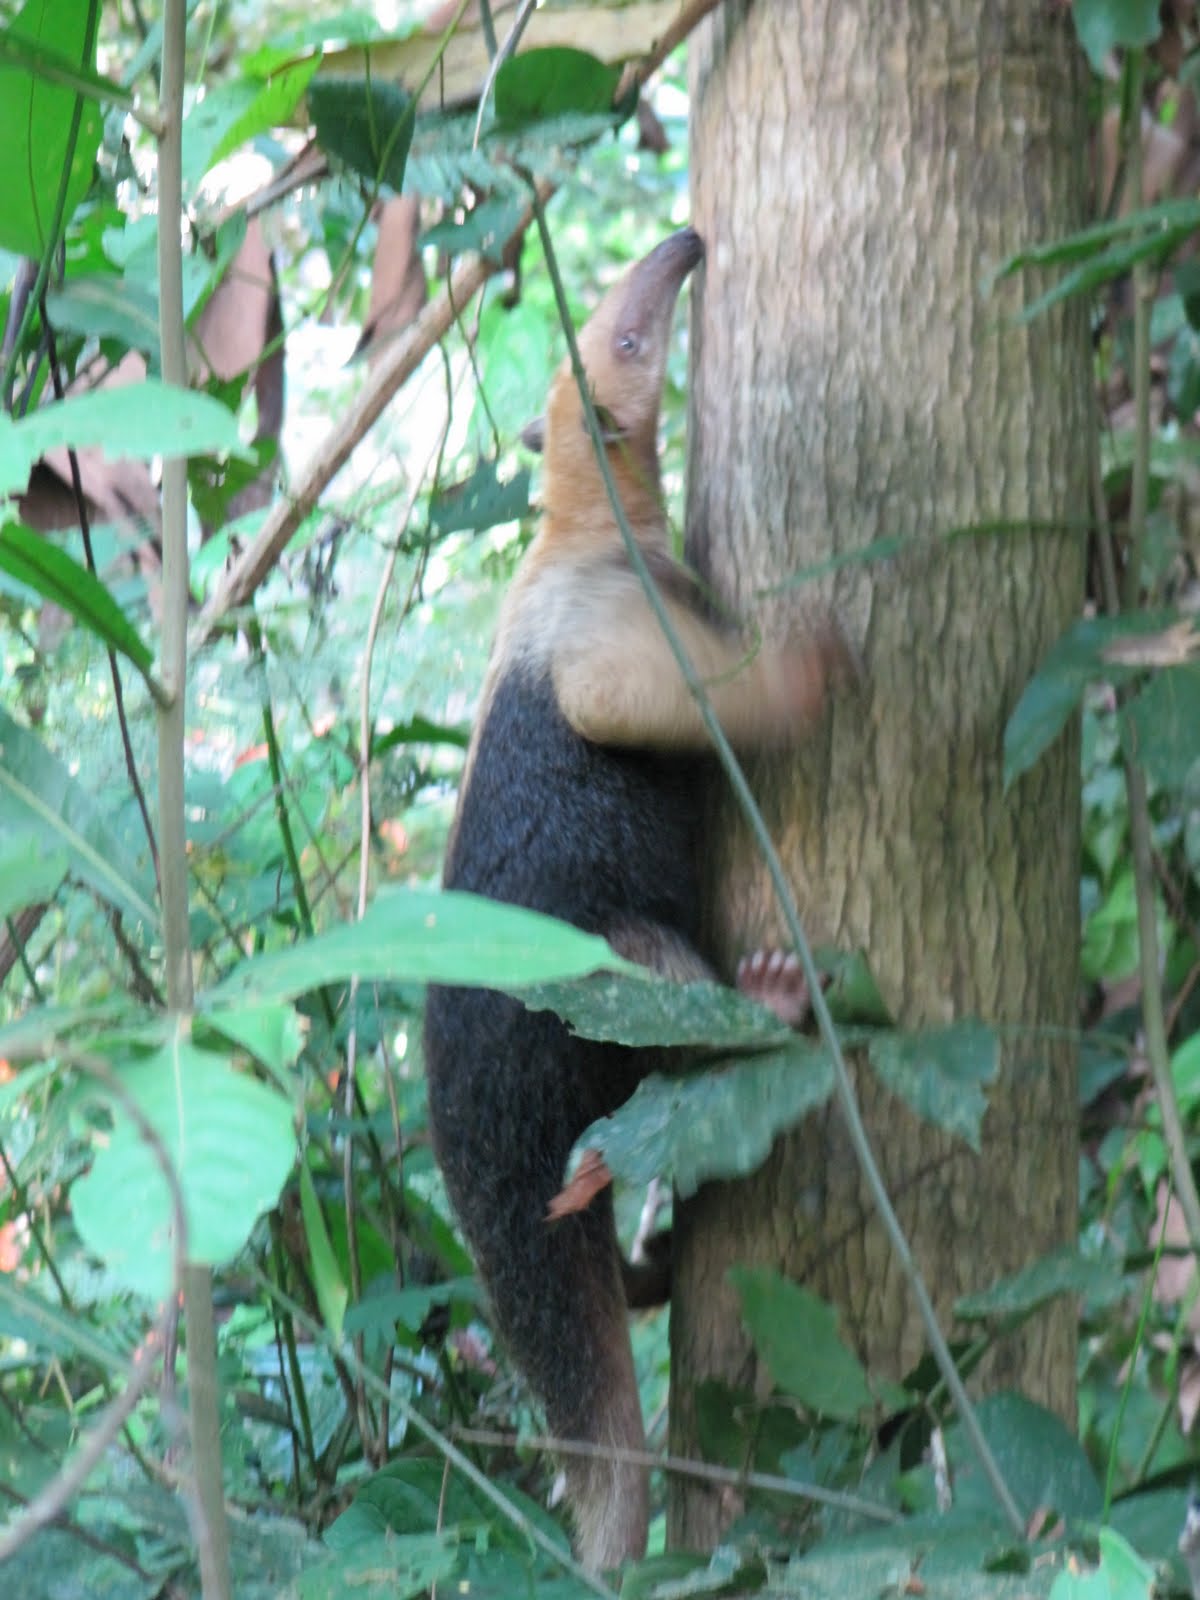 Giant Anteater climbing a tree in Tambopata